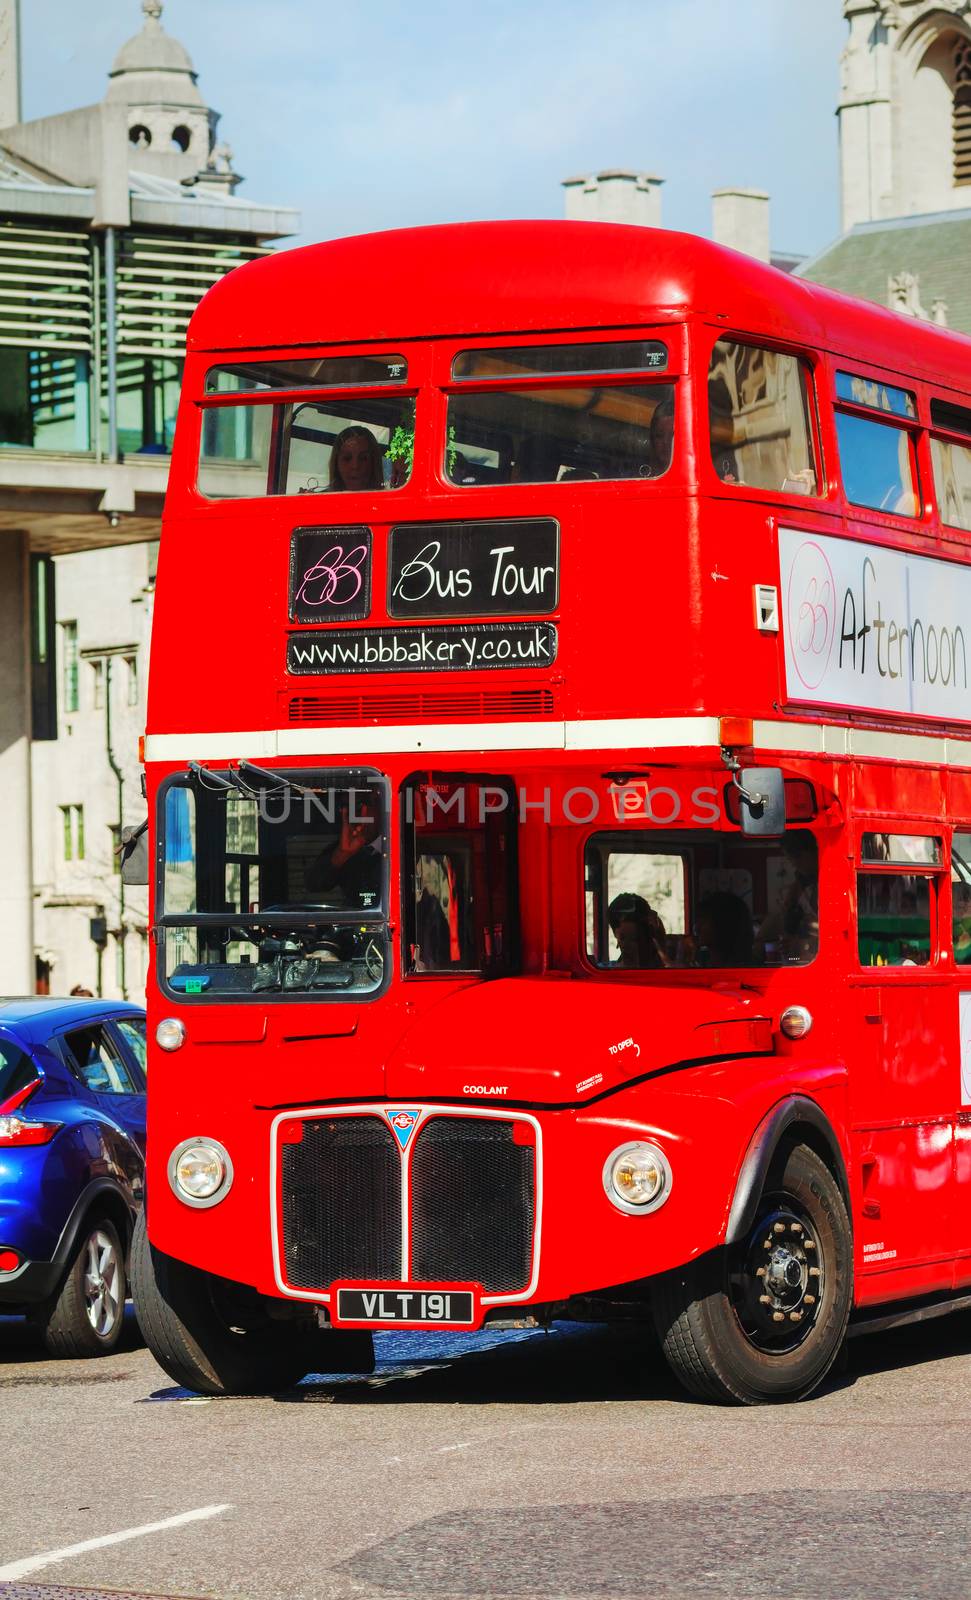 LONDON - APRIL 12: Iconic red double decker bus on April 12, 2015 in London, UK. The London Bus is one of London's principal icons, the archetypal red rear-entrance Routemaster recognised worldwide.